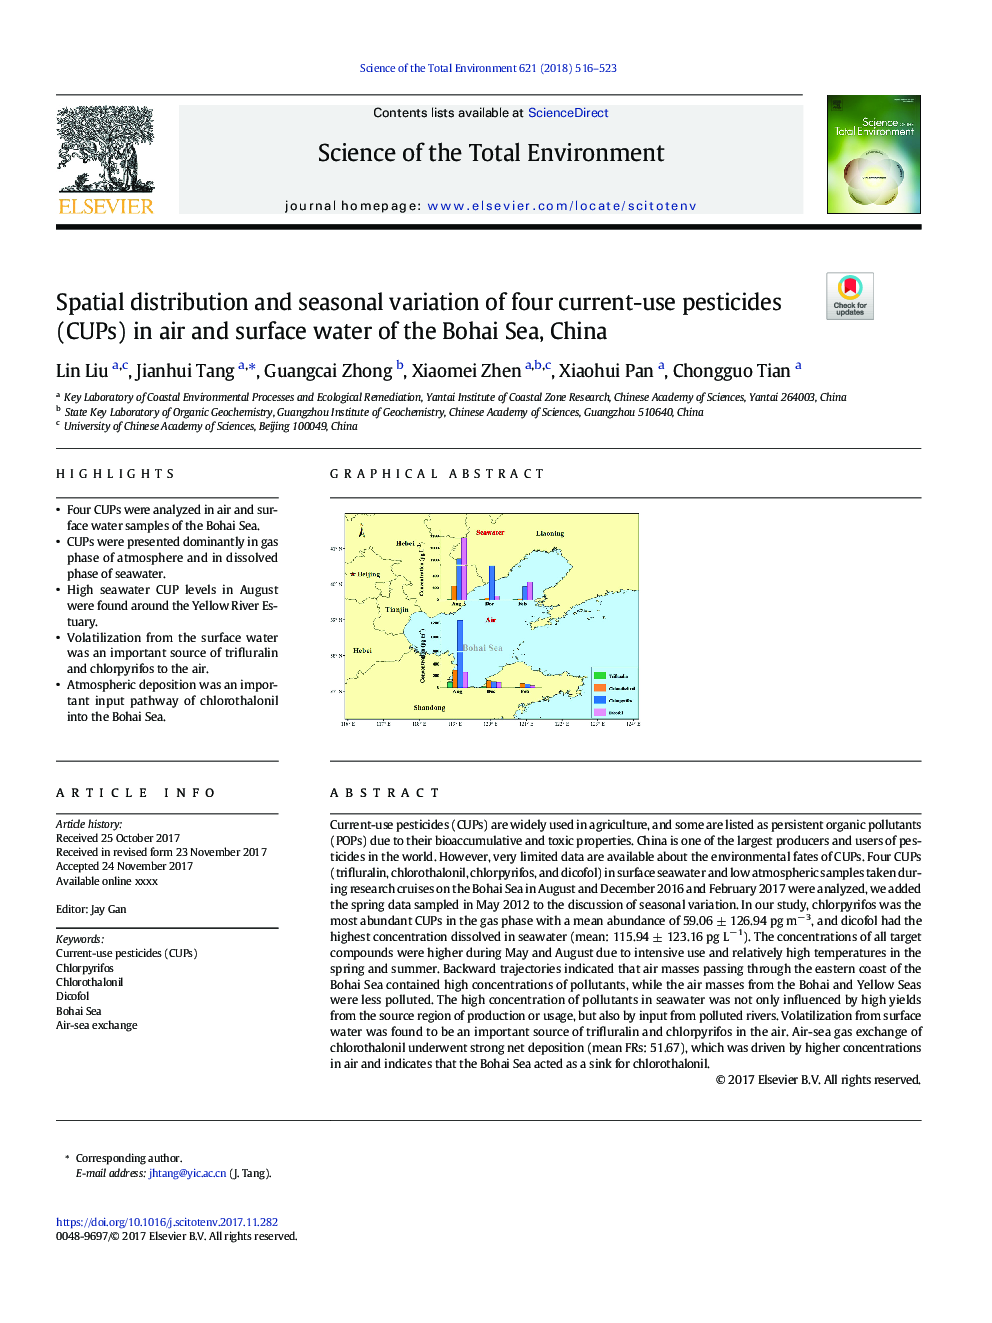 Spatial distribution and seasonal variation of four current-use pesticides (CUPs) in air and surface water of the Bohai Sea, China